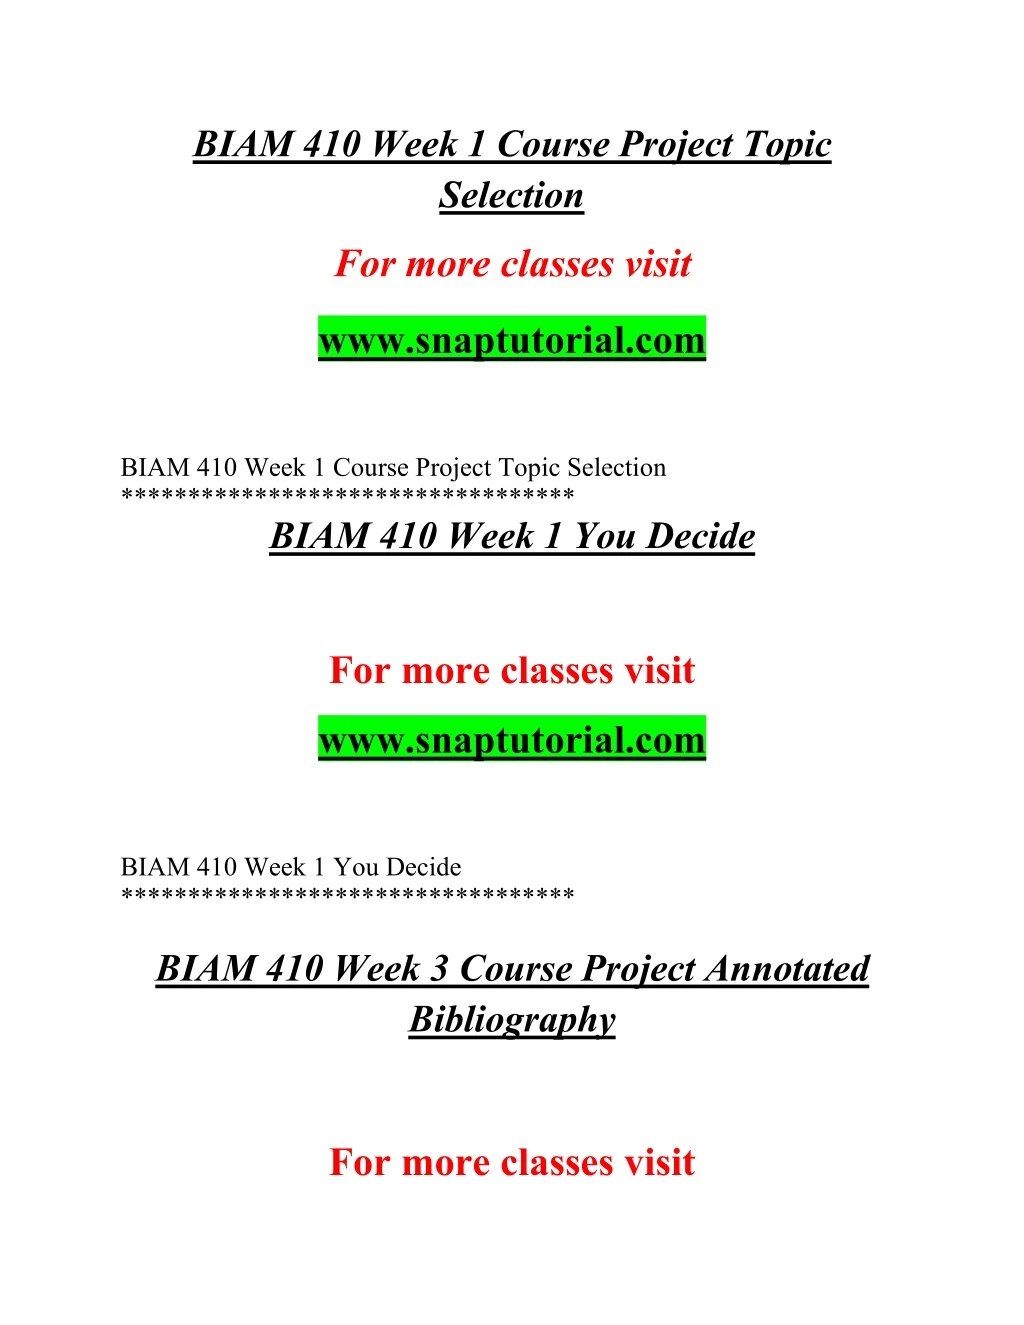 biam 410 week 1 course project topic selection